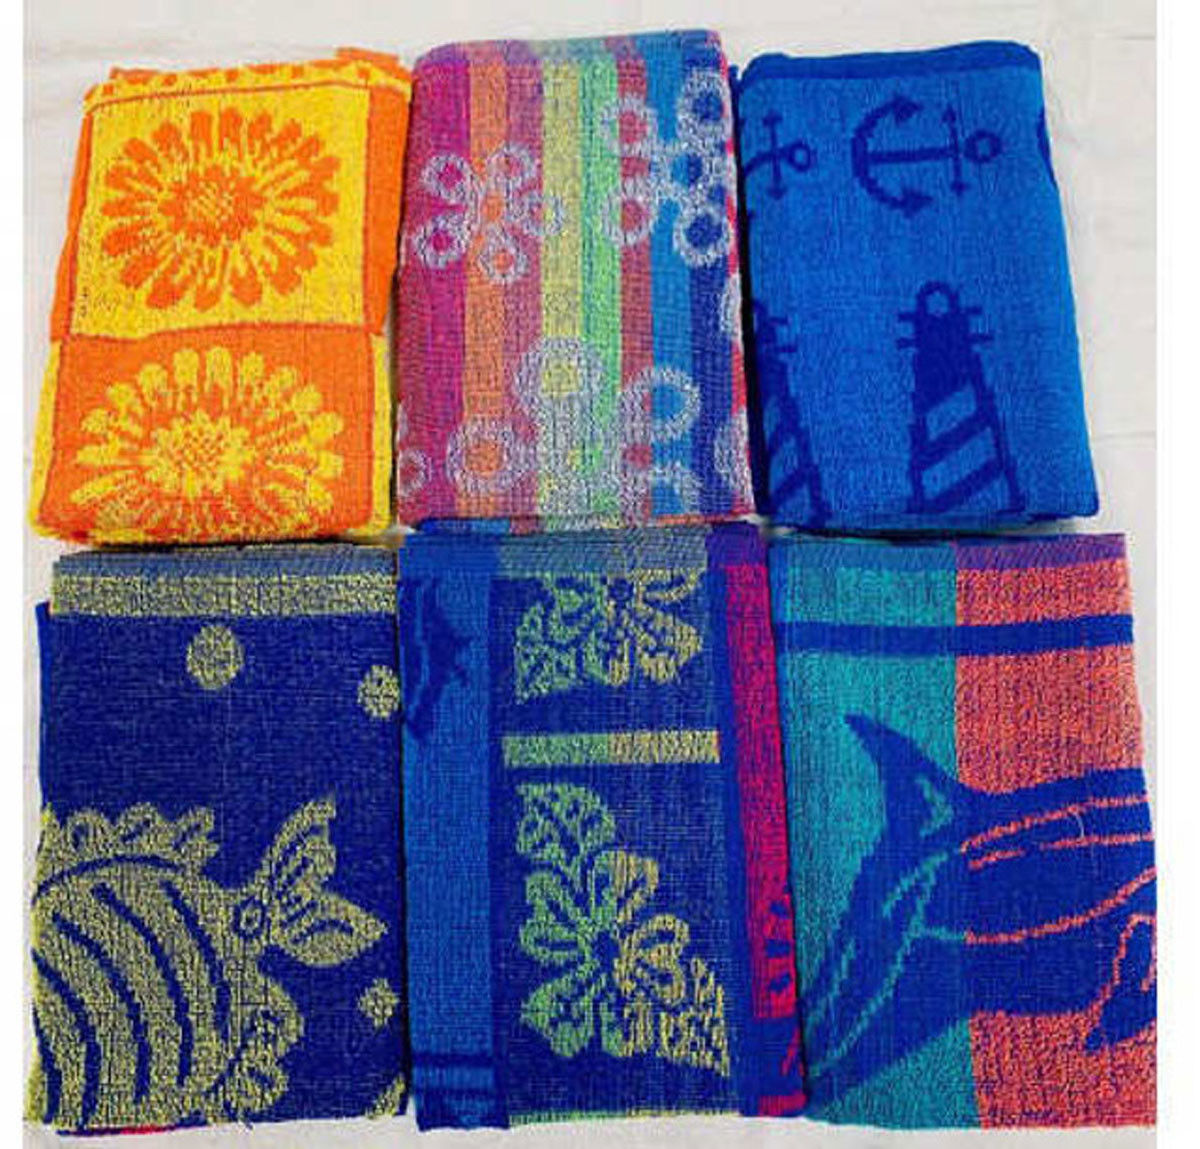 How is the 6 Pack- Design Assortment of economy pool towels sold?